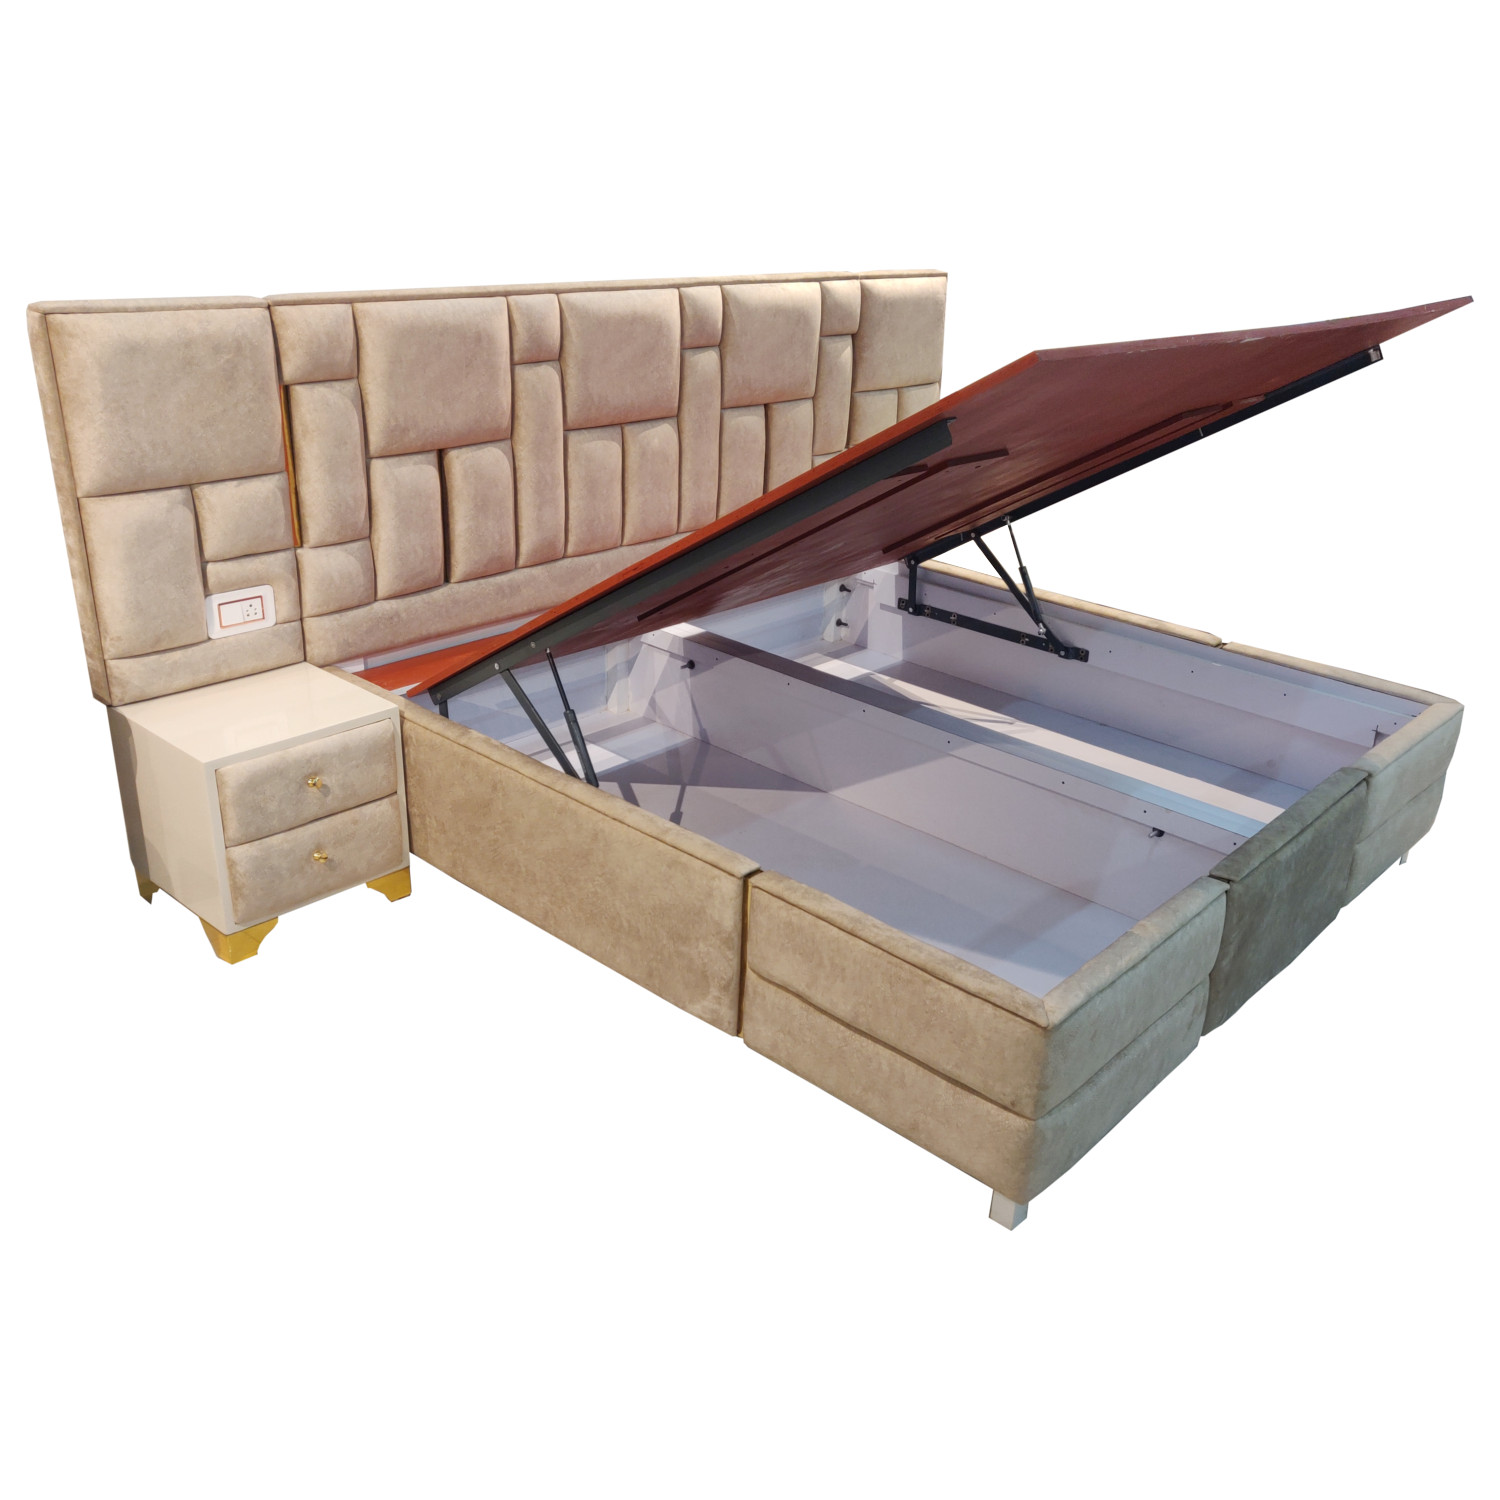 Amaltas Signature Double Bed with Side Tables and Box Storage